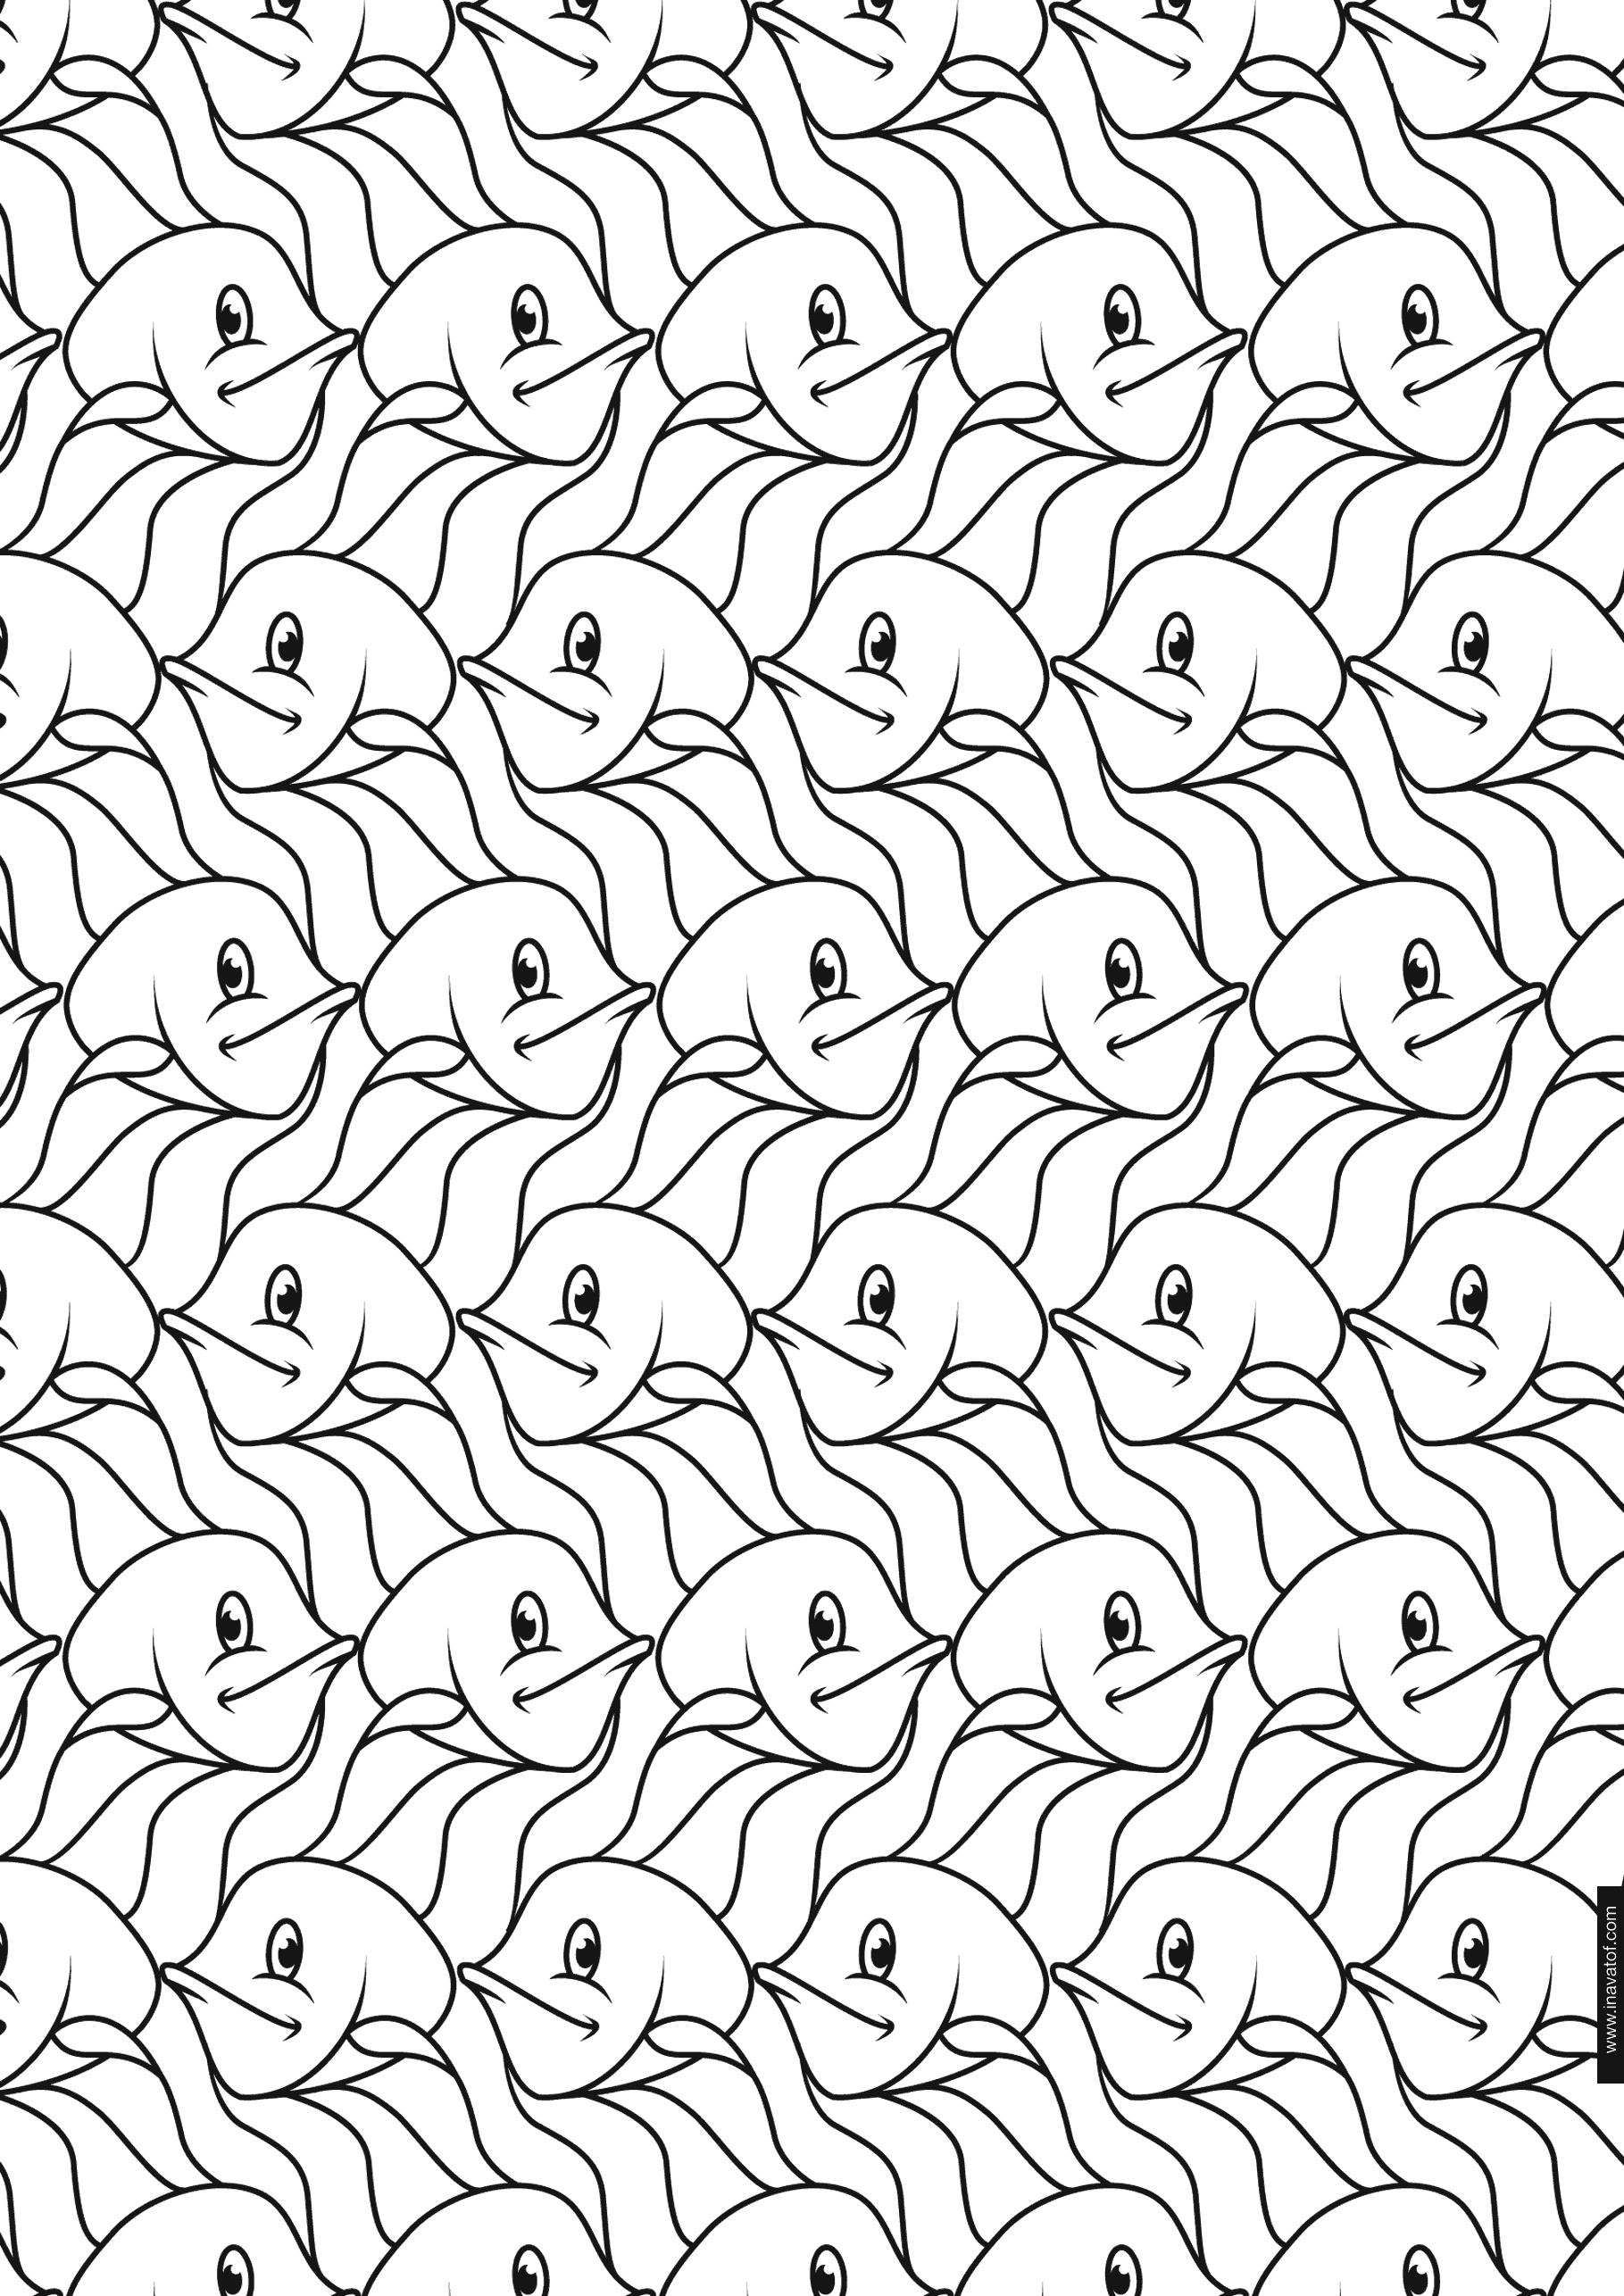 Tessellation Patterns Coloring Pages Tessellation Coloring Pages ...